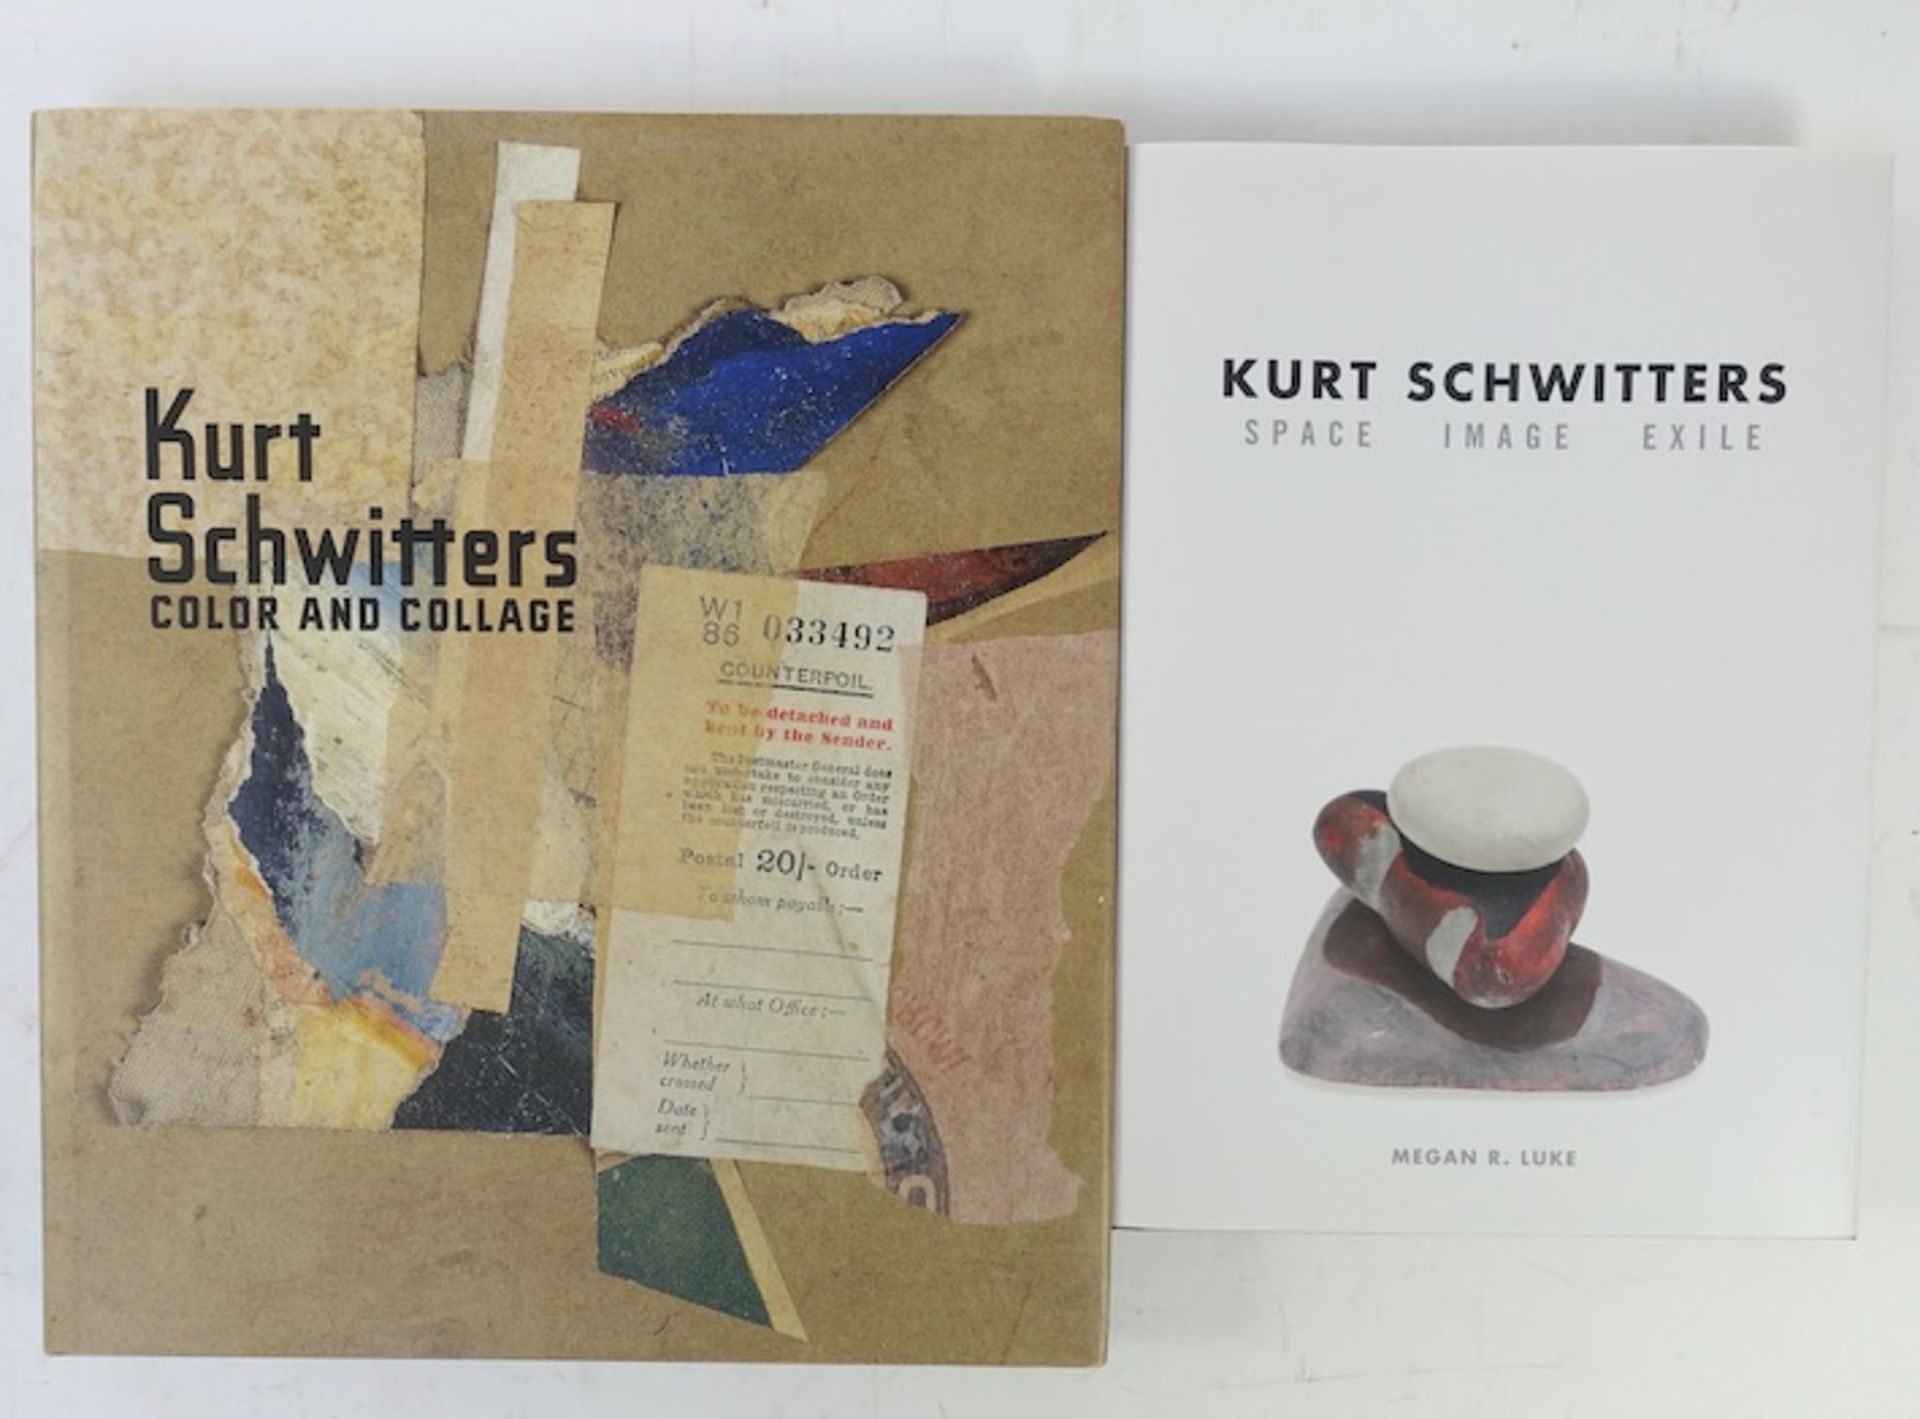 DADAISM -- SCHWITTERS -- SCHULZ, I., ed. Kurt Schwitters, color and collages. Contributions by L.